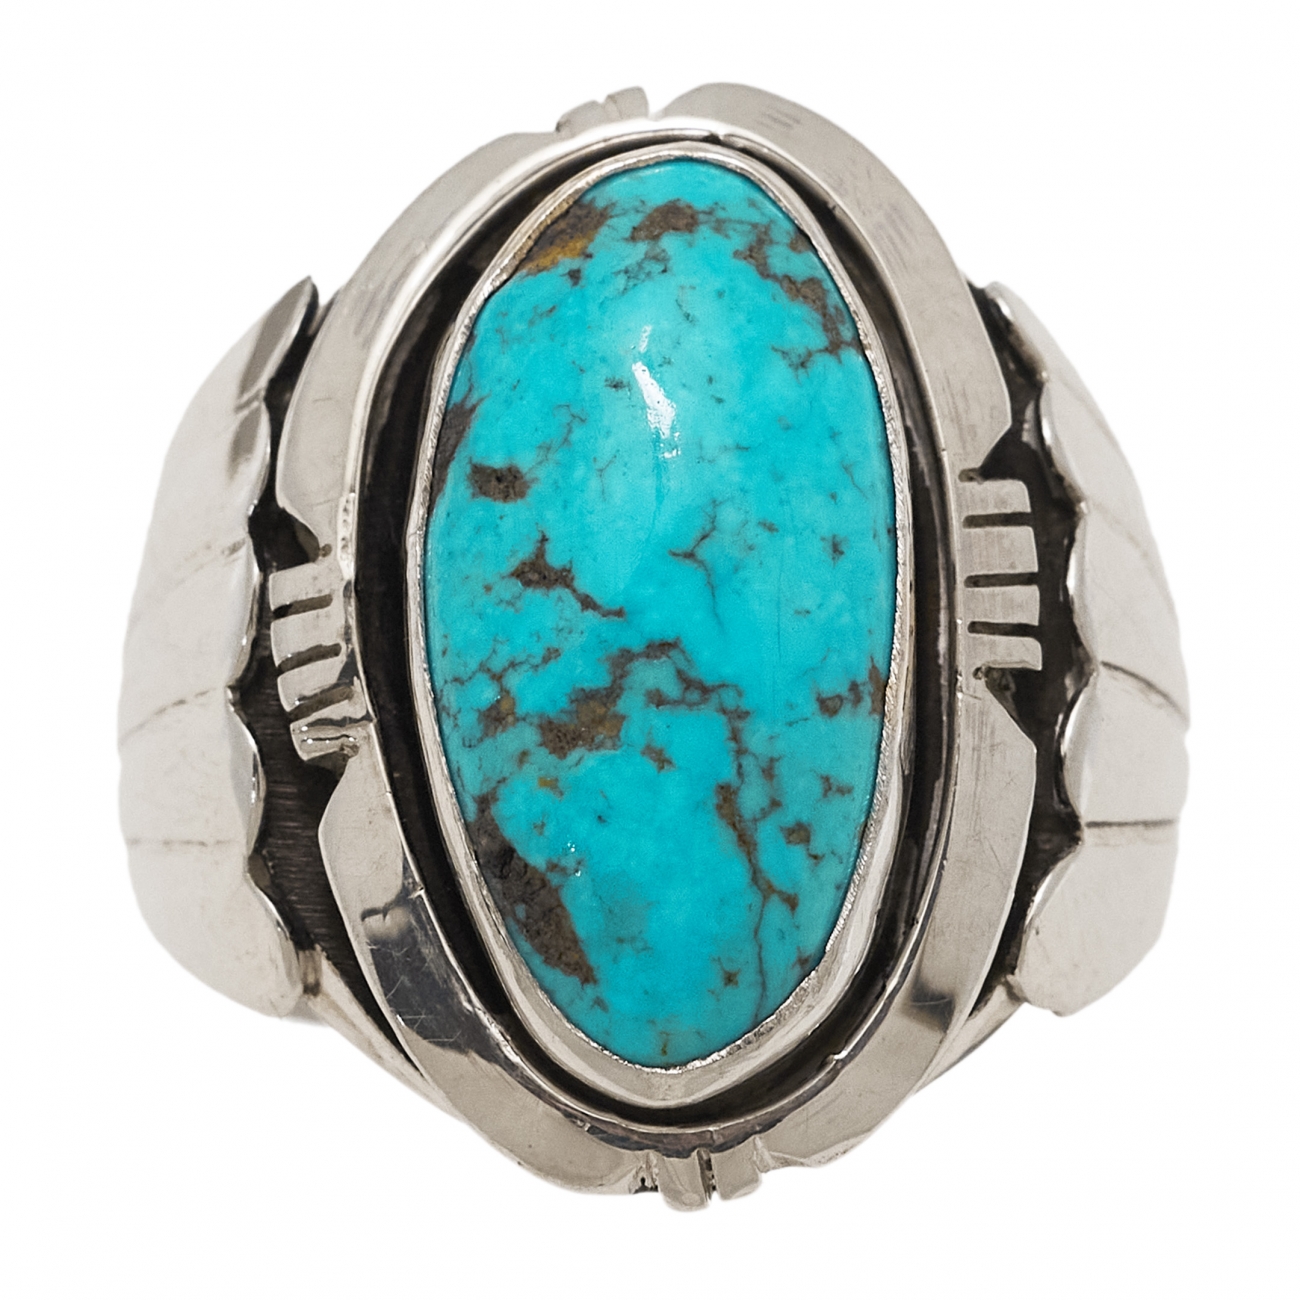 Navajo ring BA1273 in turquoise and silver - Harpo Paris